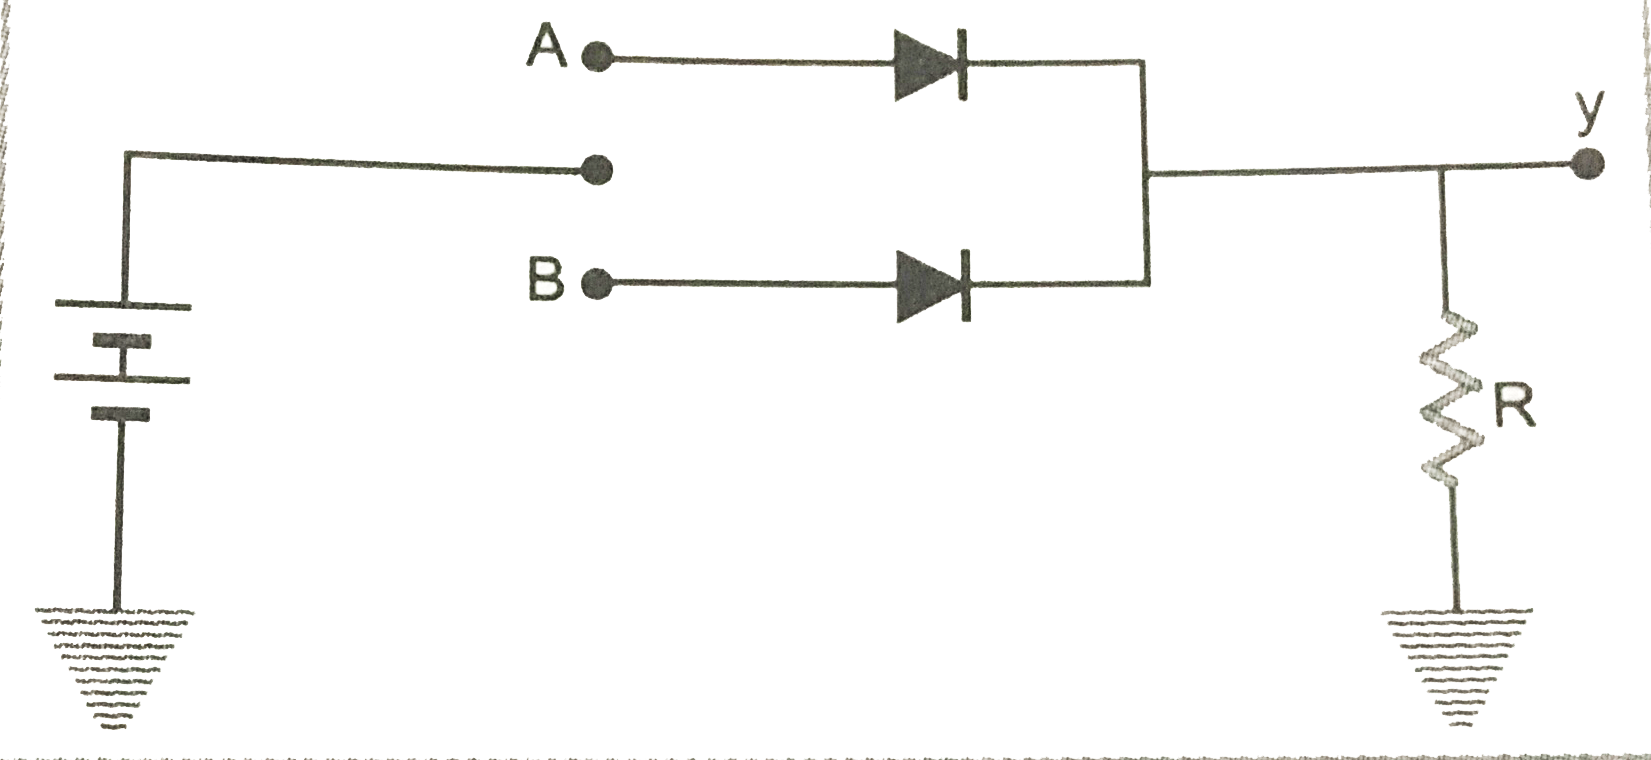 Name the logic gate realised using p-n junction diode in the given Fig.Give its logic symbol.